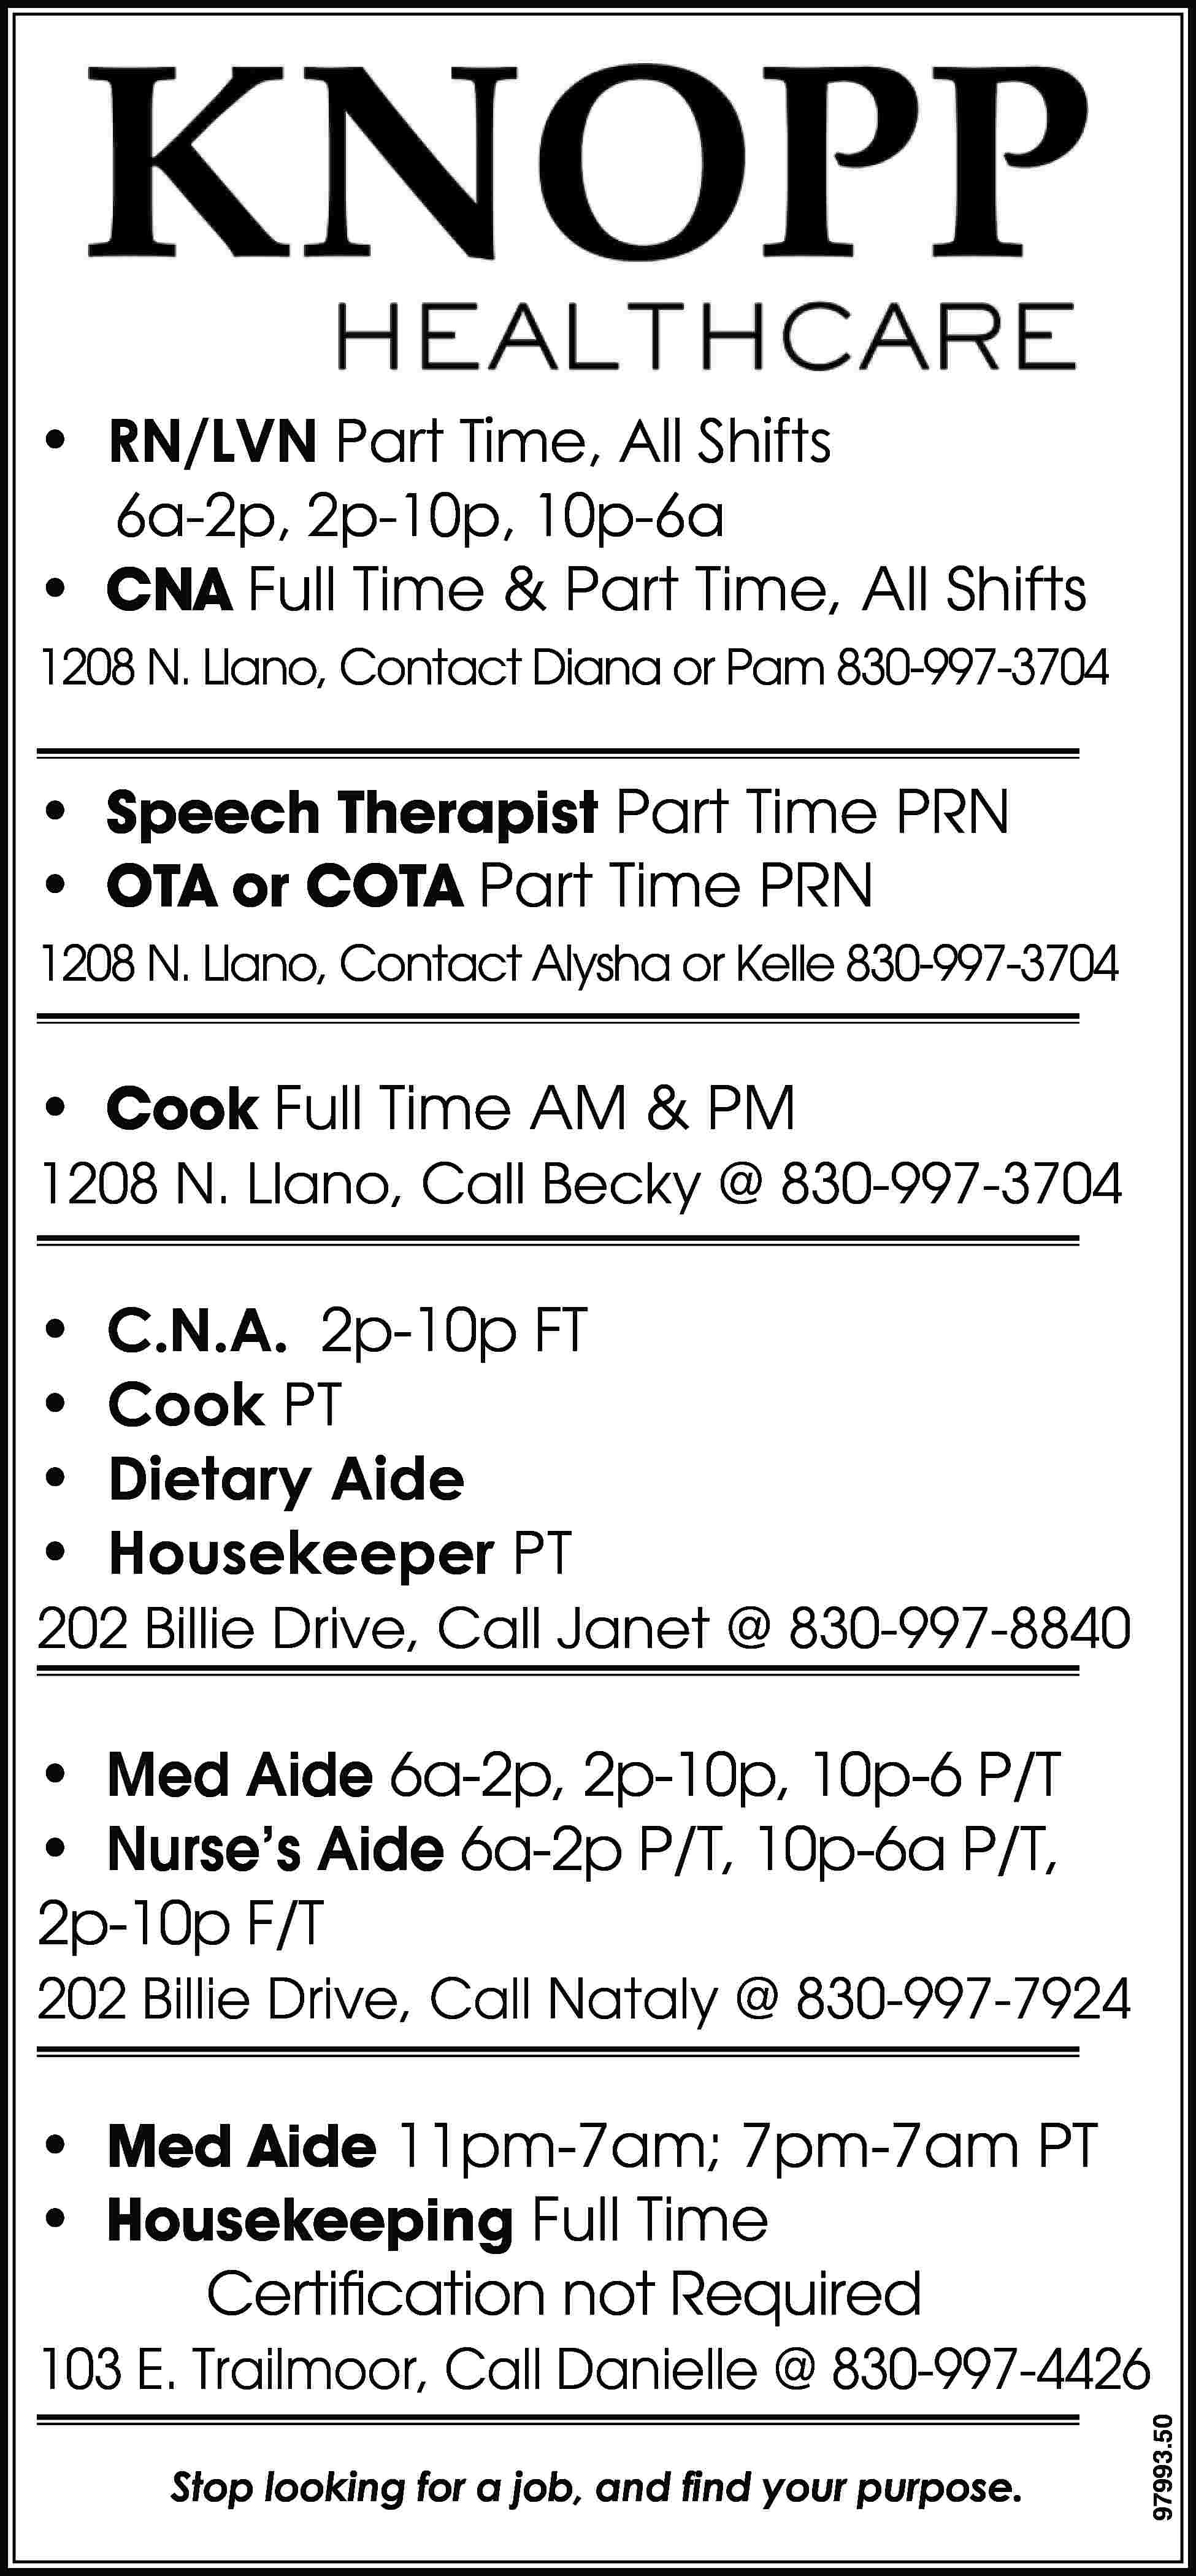 • RN/LVN Part Time, All  • RN/LVN Part Time, All Shifts 6a-2p, 2p-10p, 10p-6a • CNA Full Time & Part Time, All Shifts 1208 N. Llano, Contact Diana or Pam 830-997-3704 • Speech Therapist Part Time PRN • OTA or COTA Part Time PRN 1208 N. Llano, Contact Alysha or Kelle 830-997-3704 • Cook Full Time AM & PM 1208 N. Llano, Call Becky @ 830-997-3704 • • • • C.N.A. 2p-10p FT Cook PT Dietary Aide Housekeeper PT 202 Billie Drive, Call Janet @ 830-997-8840 • Med Aide 6a-2p, 2p-10p, 10p-6 P/T • Nurse’s Aide 6a-2p P/T, 10p-6a P/T, 2p-10p F/T 202 Billie Drive, Call Nataly @ 830-997-7924 • Med Aide 11pm-7am; 7pm-7am PT • Housekeeping Full Time Certification not Required Stop looking for a job, and find your purpose. 97993.50 103 E. Trailmoor, Call Danielle @ 830-997-4426